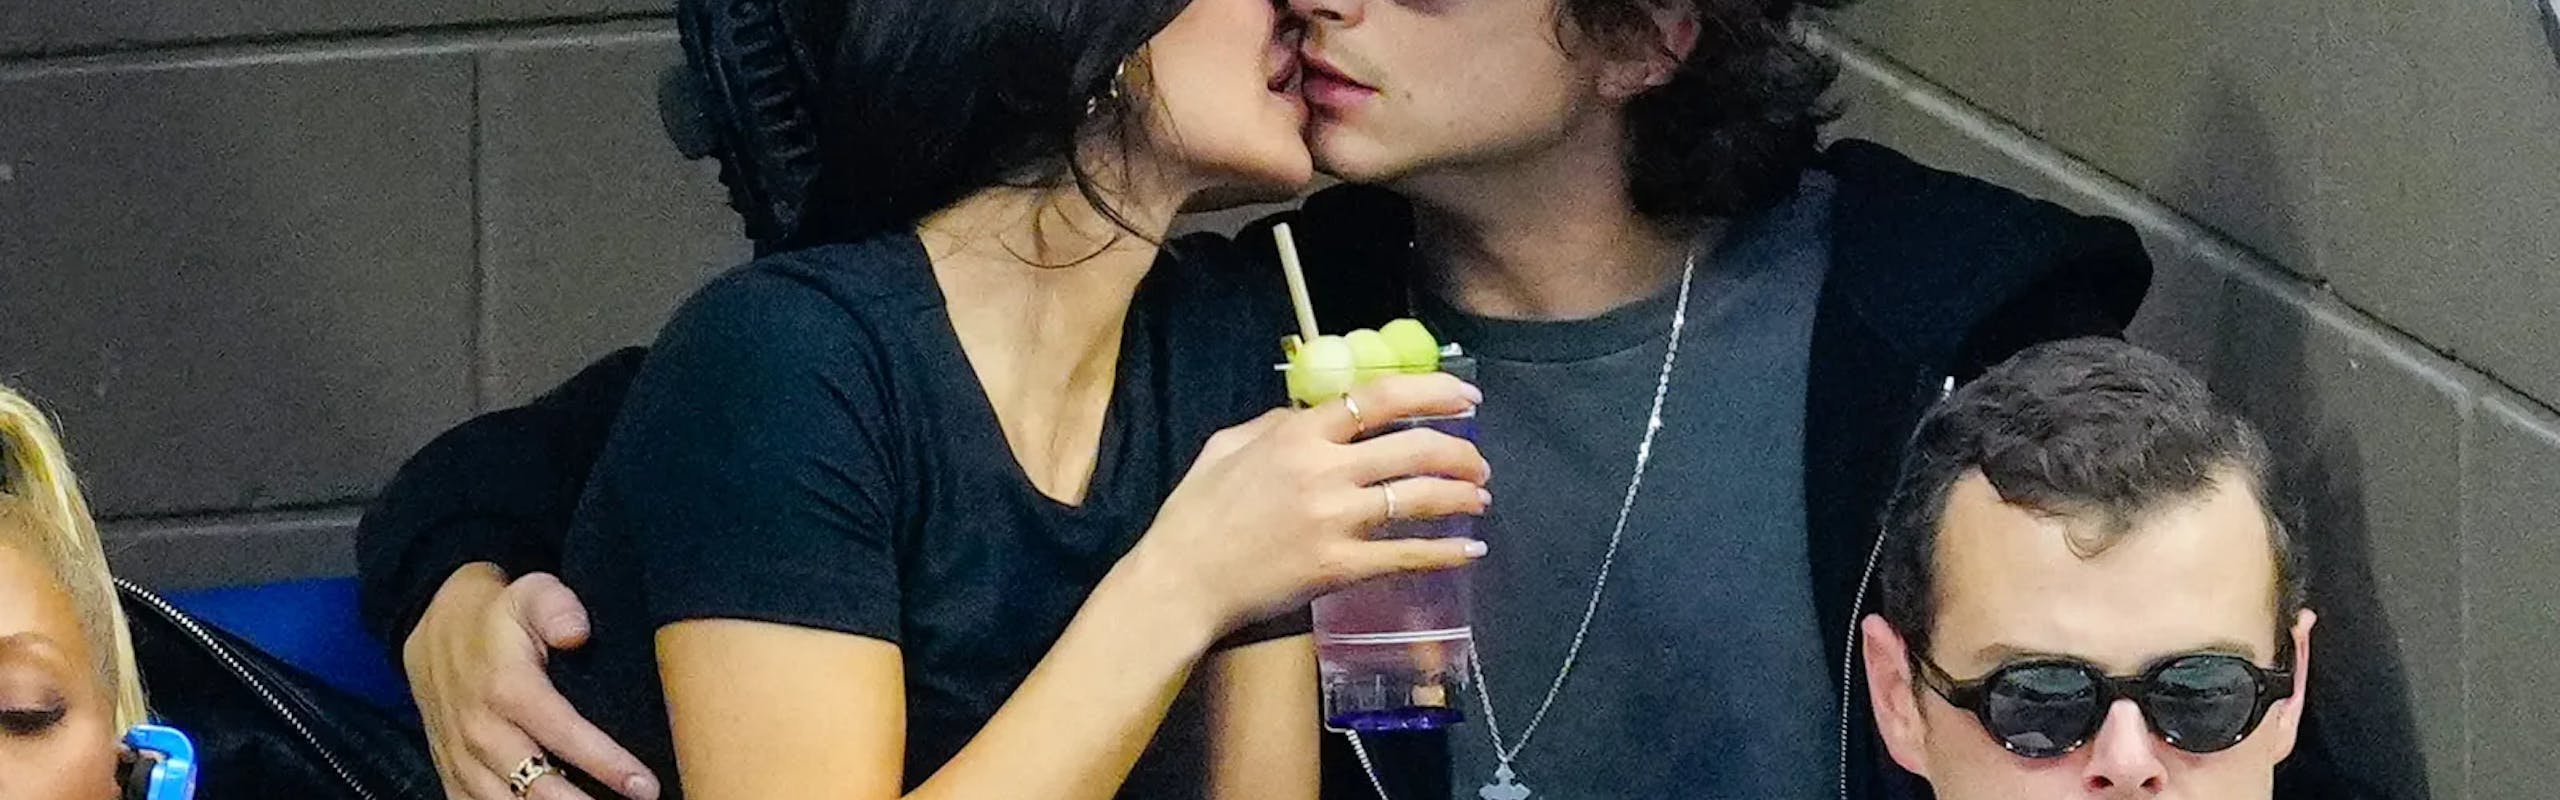 kylie jenner in a black t-shirt and updo kissing timothee chalamet in a black hoodie and grey t-shirt